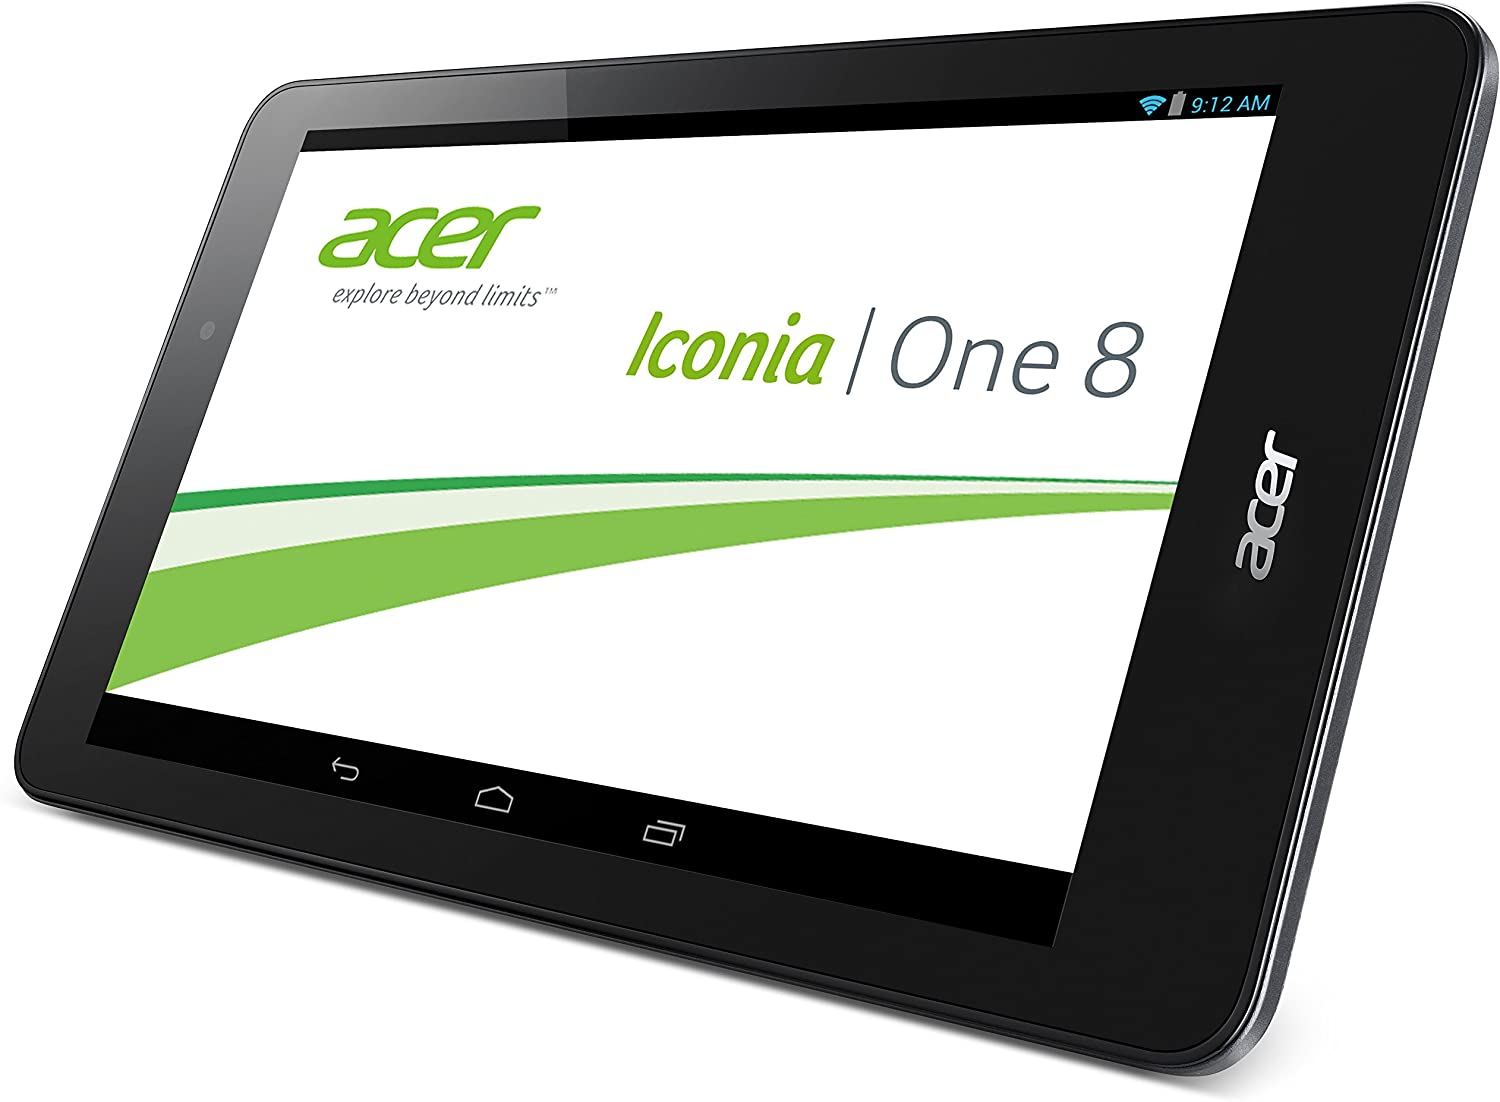 Acer Iconia One 8 B1-810 32GB Speicher, 1GB, 8 Zoll Quad Core 1.8 GHz WIFI 5 MP Android Tablet